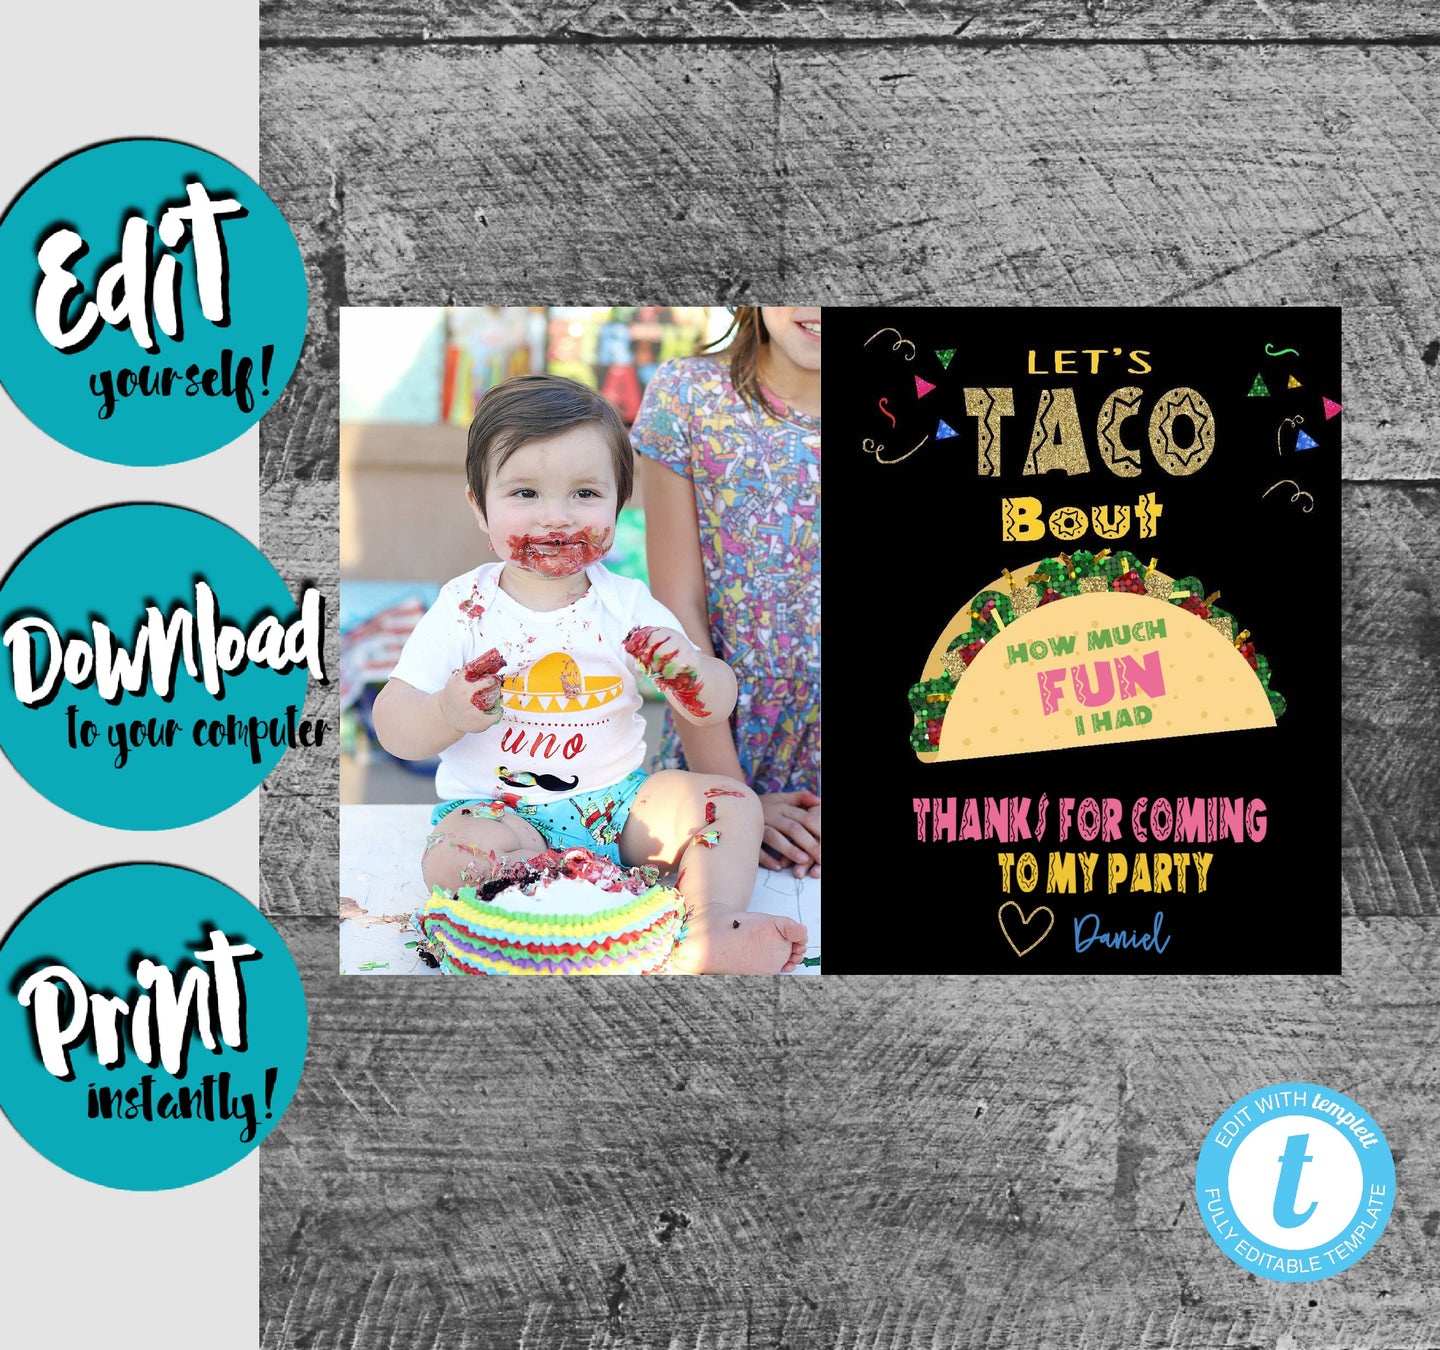 Thank You Photo Card | Let's Taco Bout How Much Fun I Had | Fiesta thank you | Printable Editable Instant Download | Photo thank you note